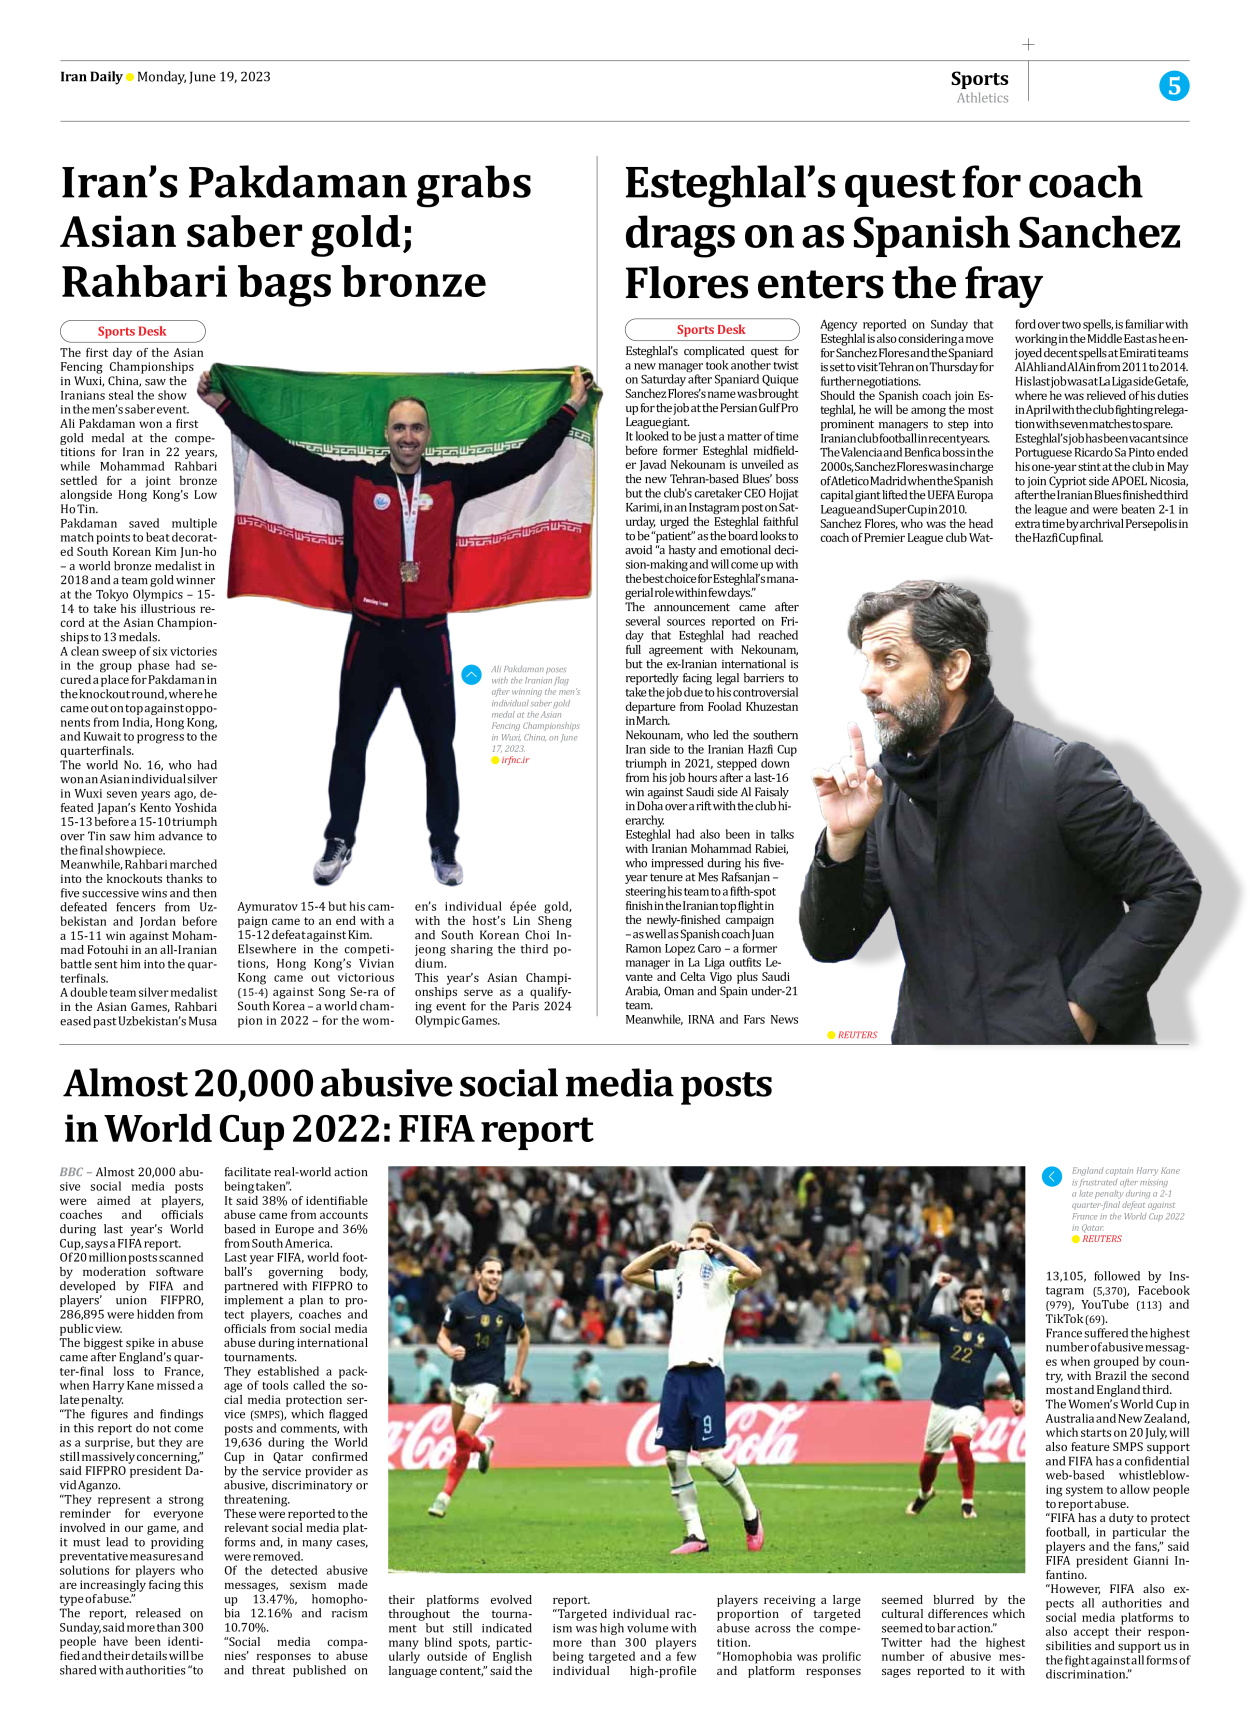 Iran Daily - Number Seven Thousand Three Hundred and Eighteen - 19 June 2023 - Page 5